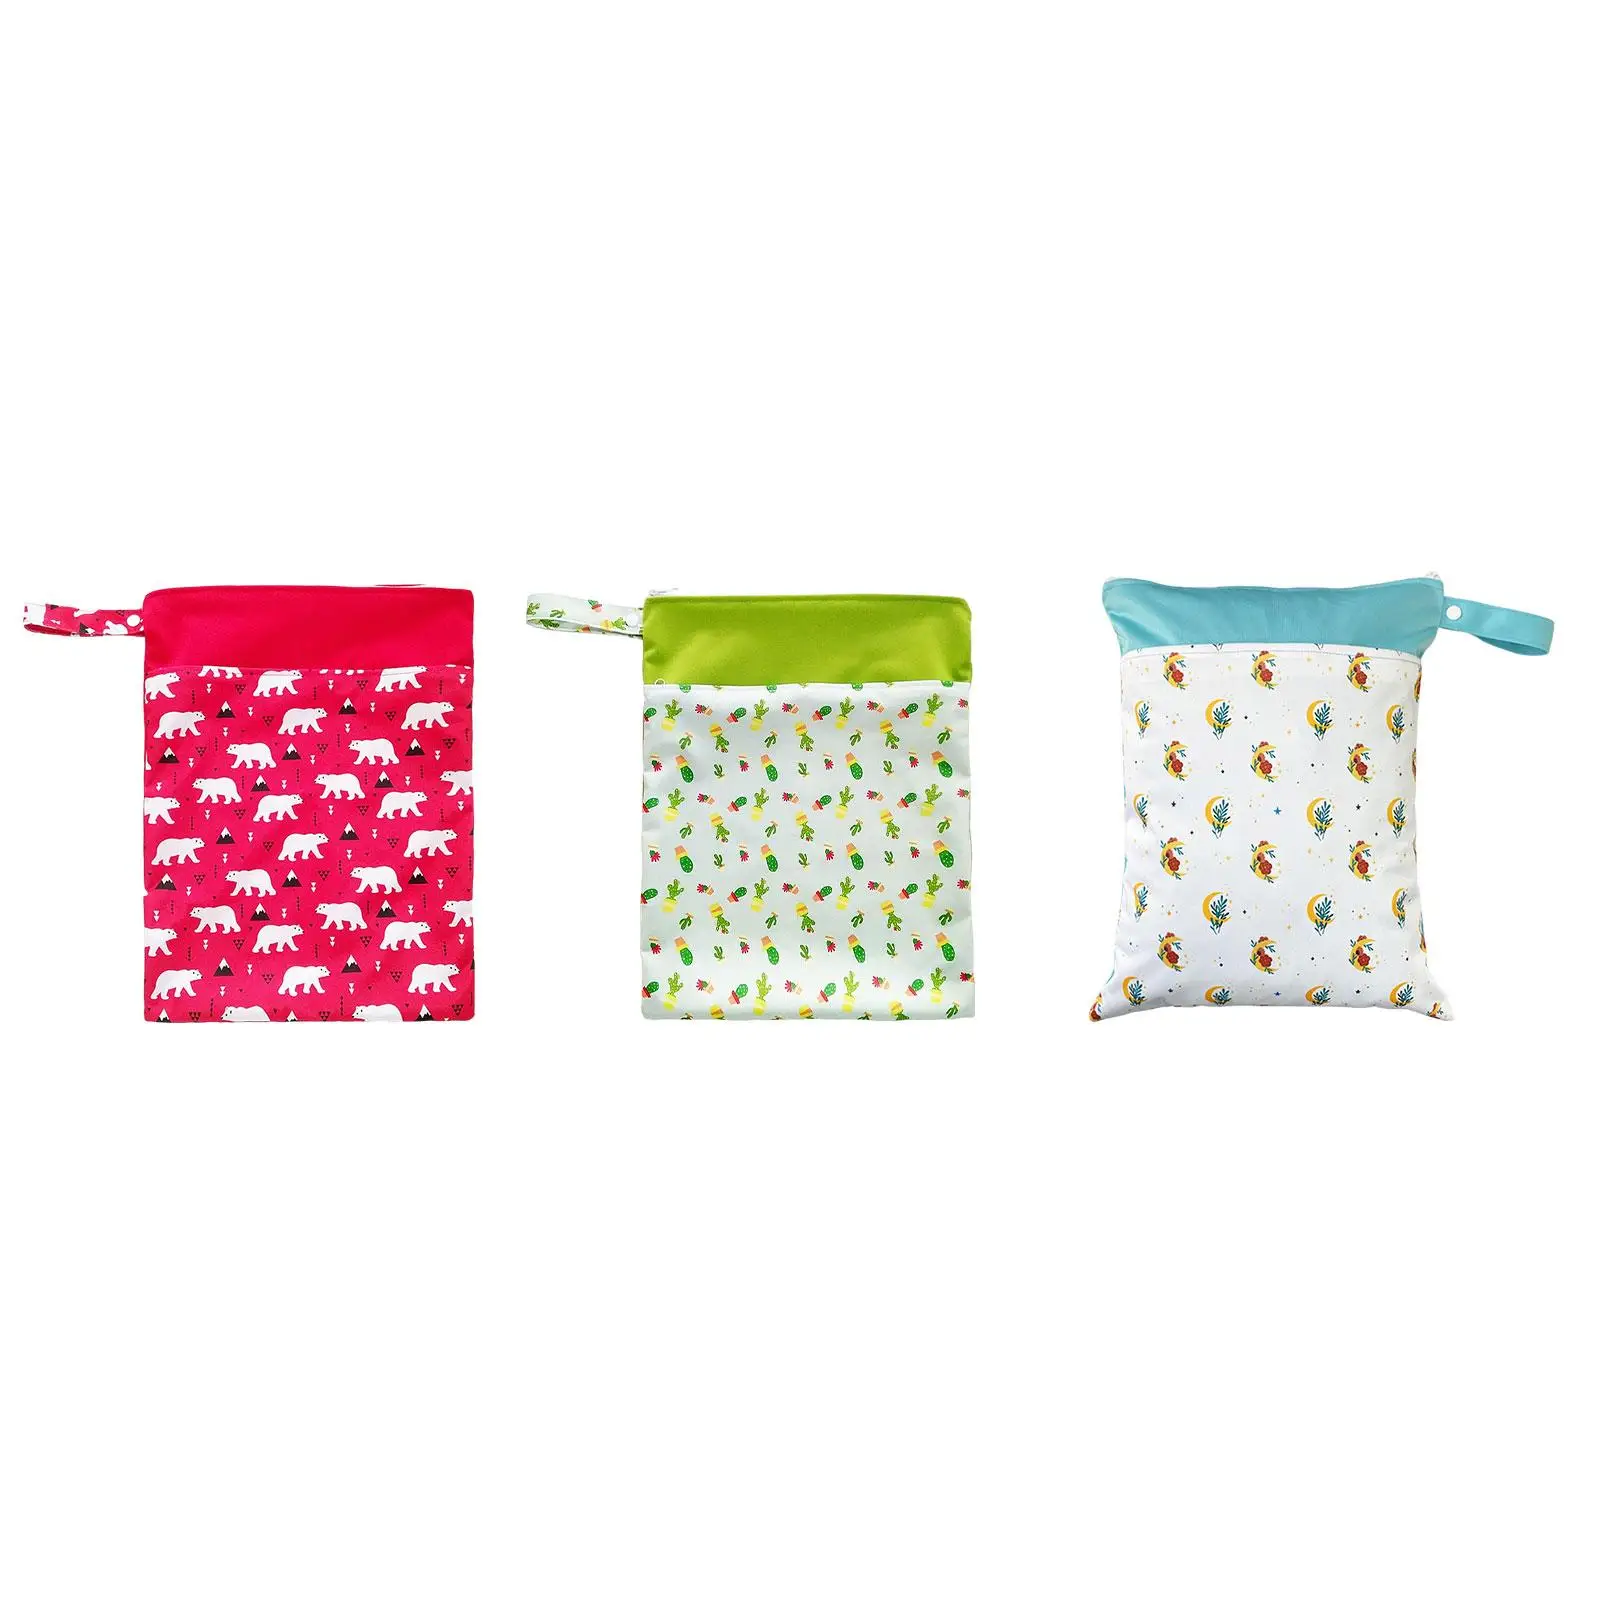 Wet and Dry Bag for Baby Cloth Diapers Baby Nappy Storage Bag for Swimsuits